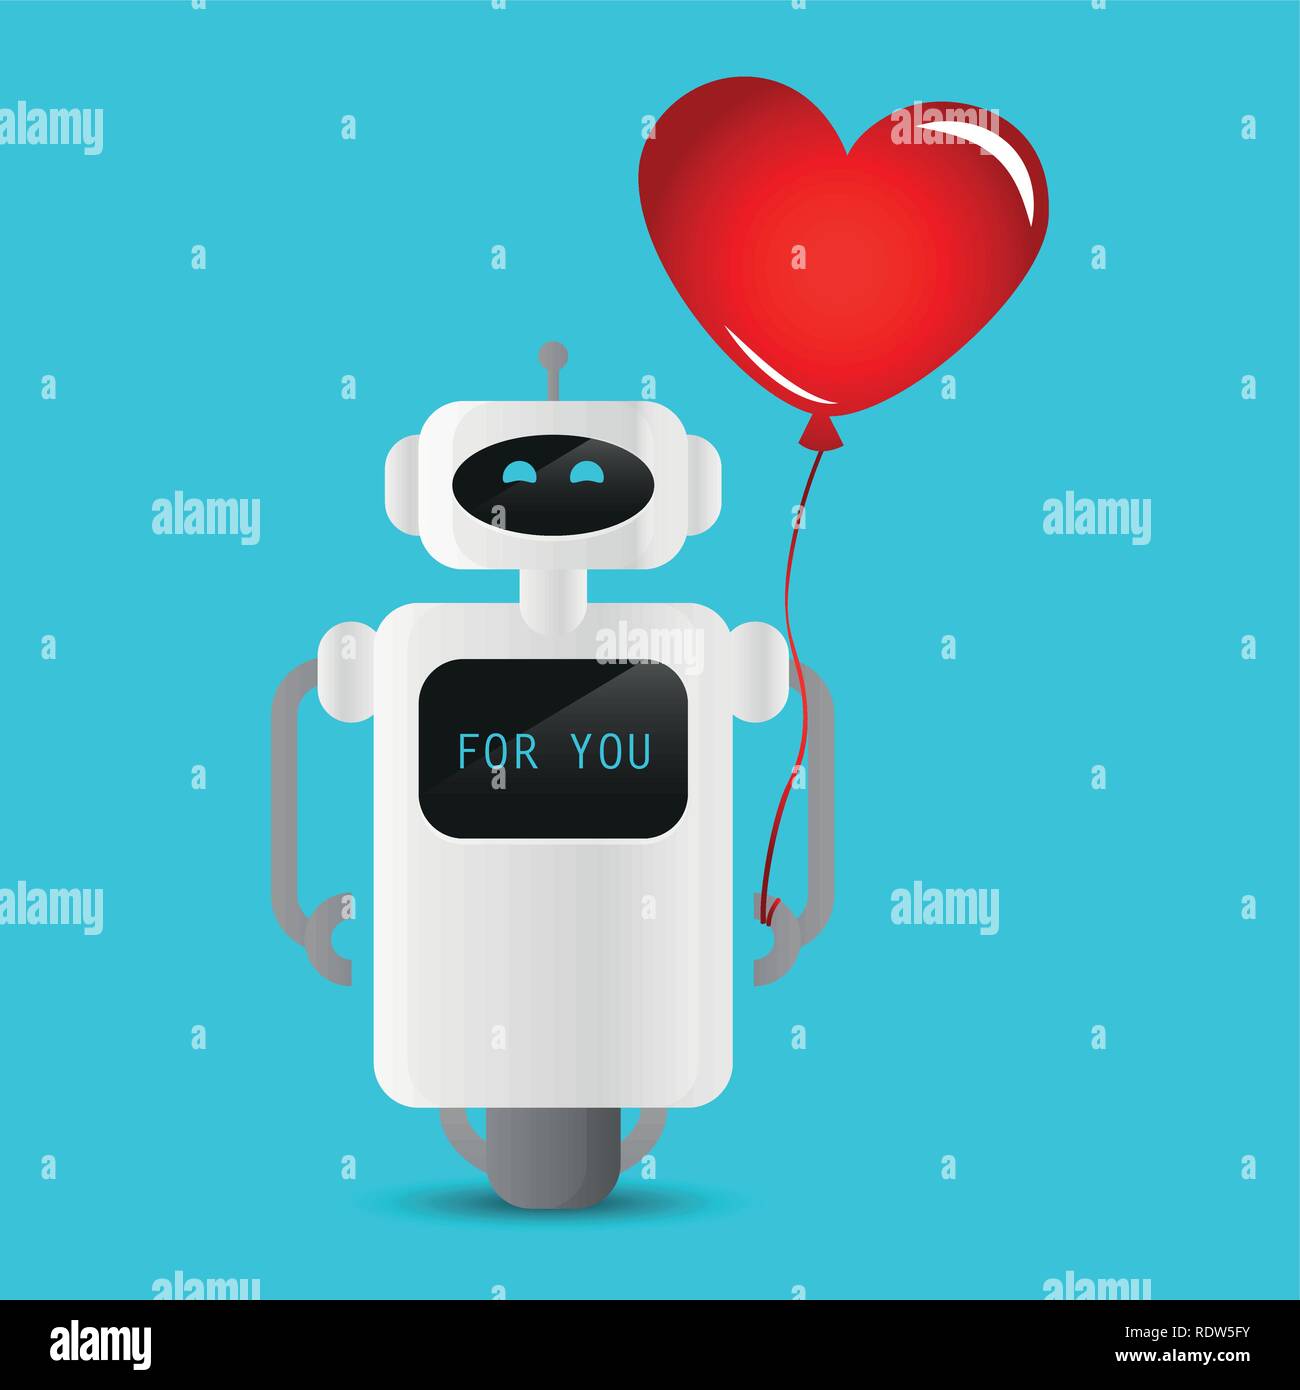 cute robot holding a red heart shaped balloon vector illustration EPS10  Stock Vector Image & Art - Alamy